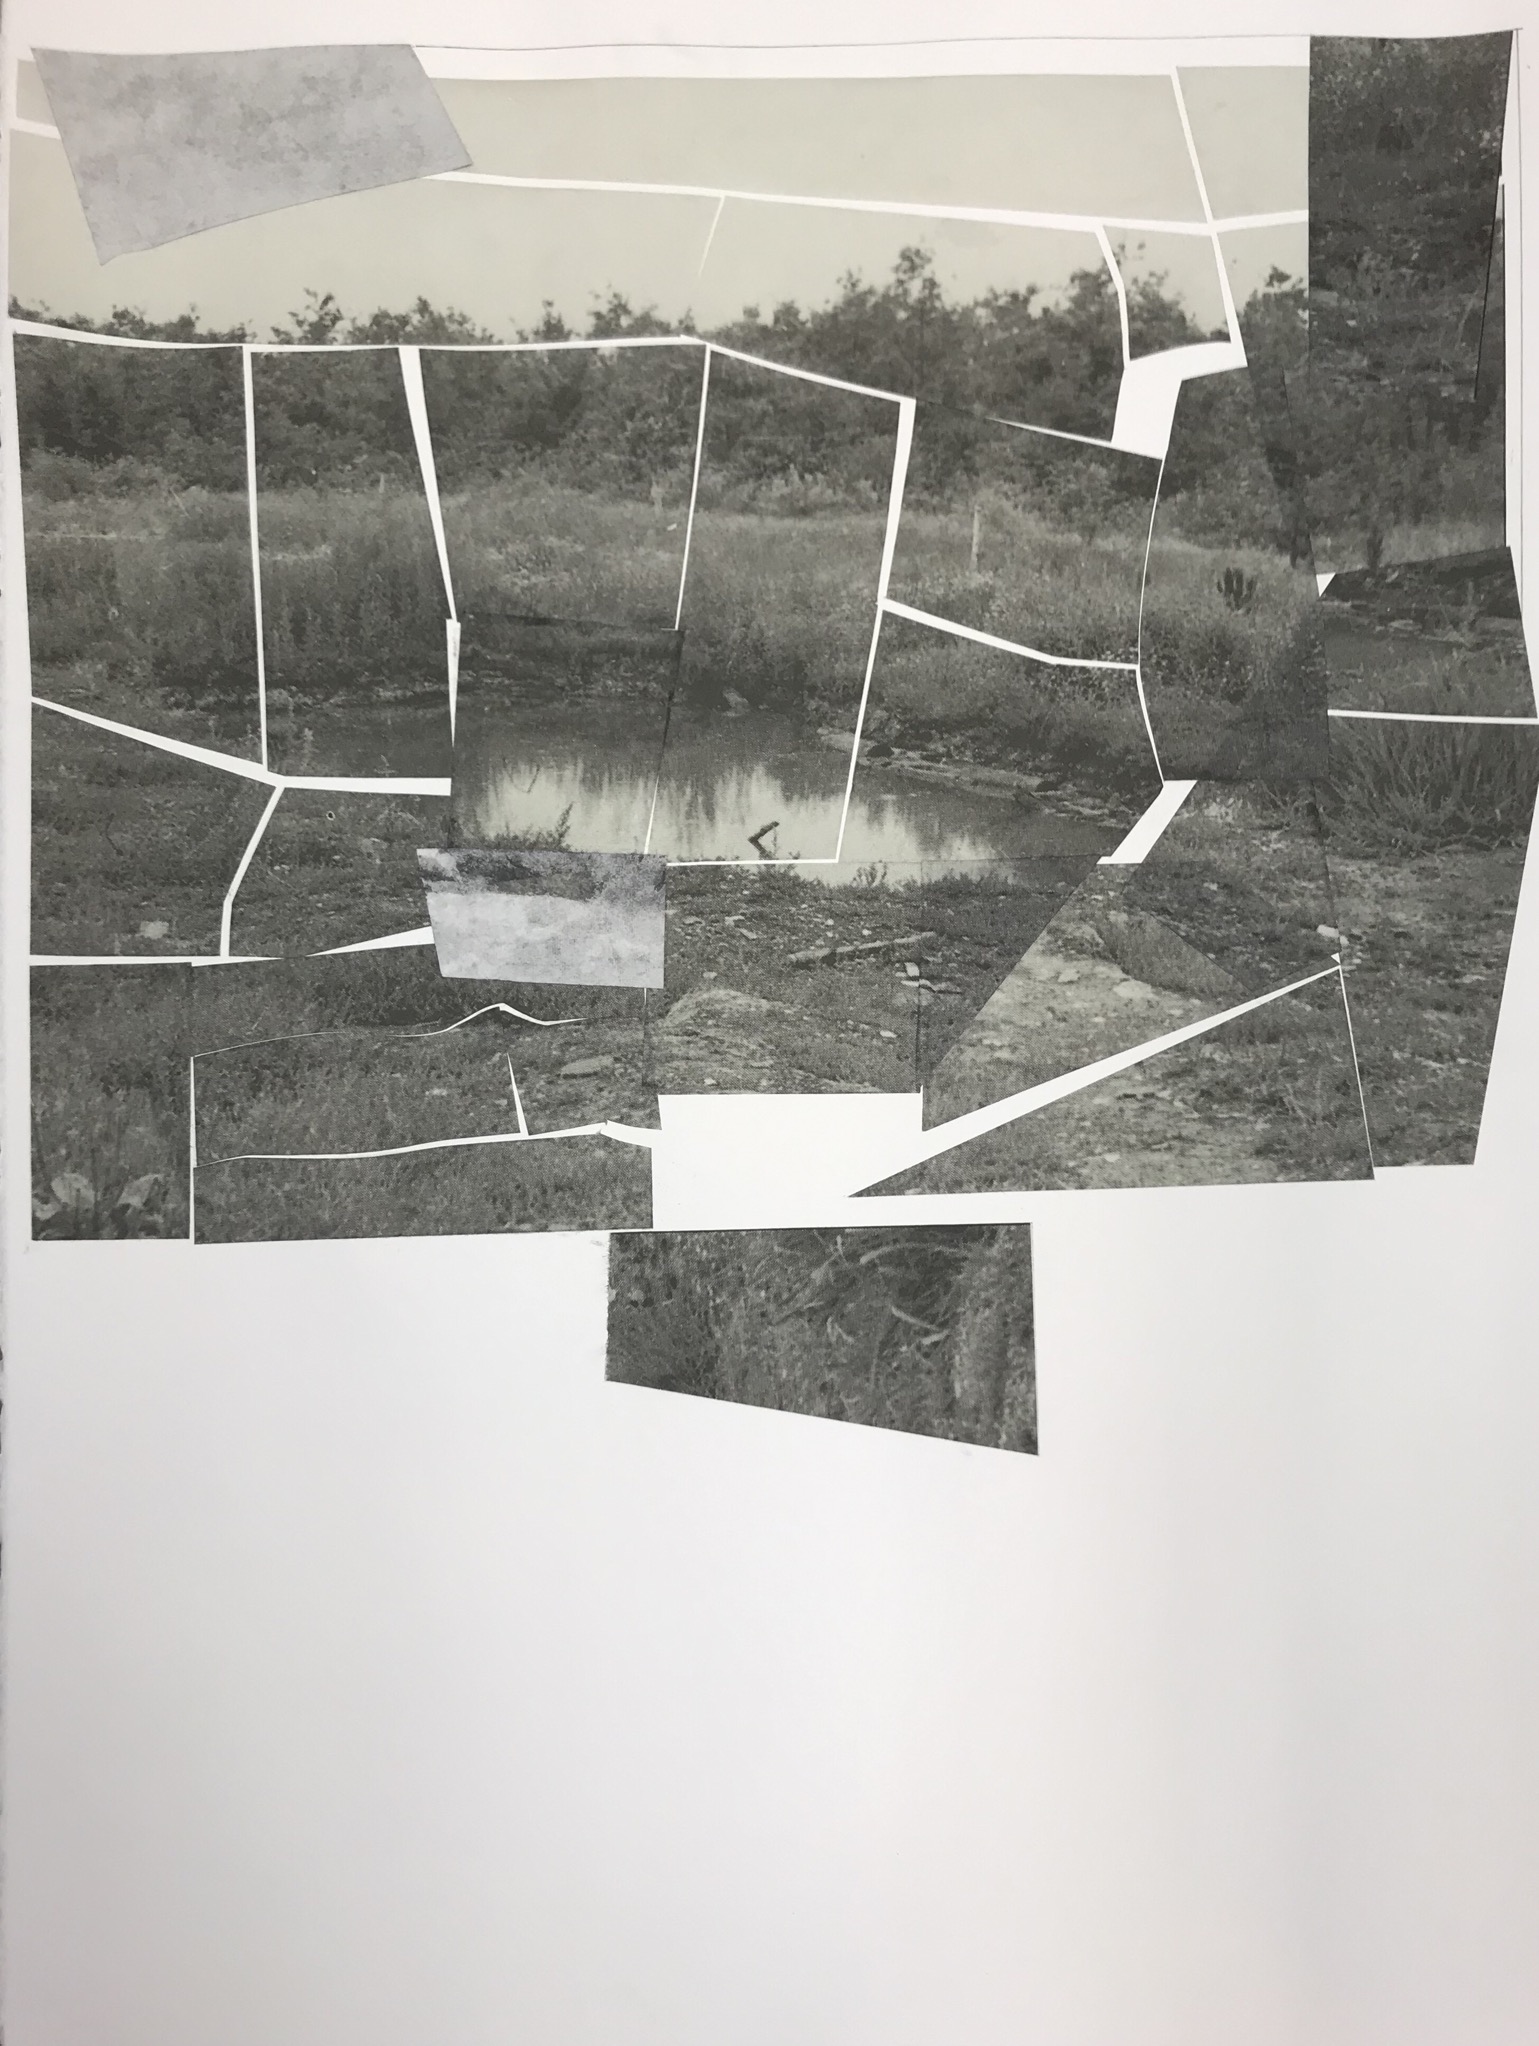 Leo Hodson, Incineration, 2020, Cut-and-pasted paper and pencil on paper, 22x30”, Image Courtesy of the Artist